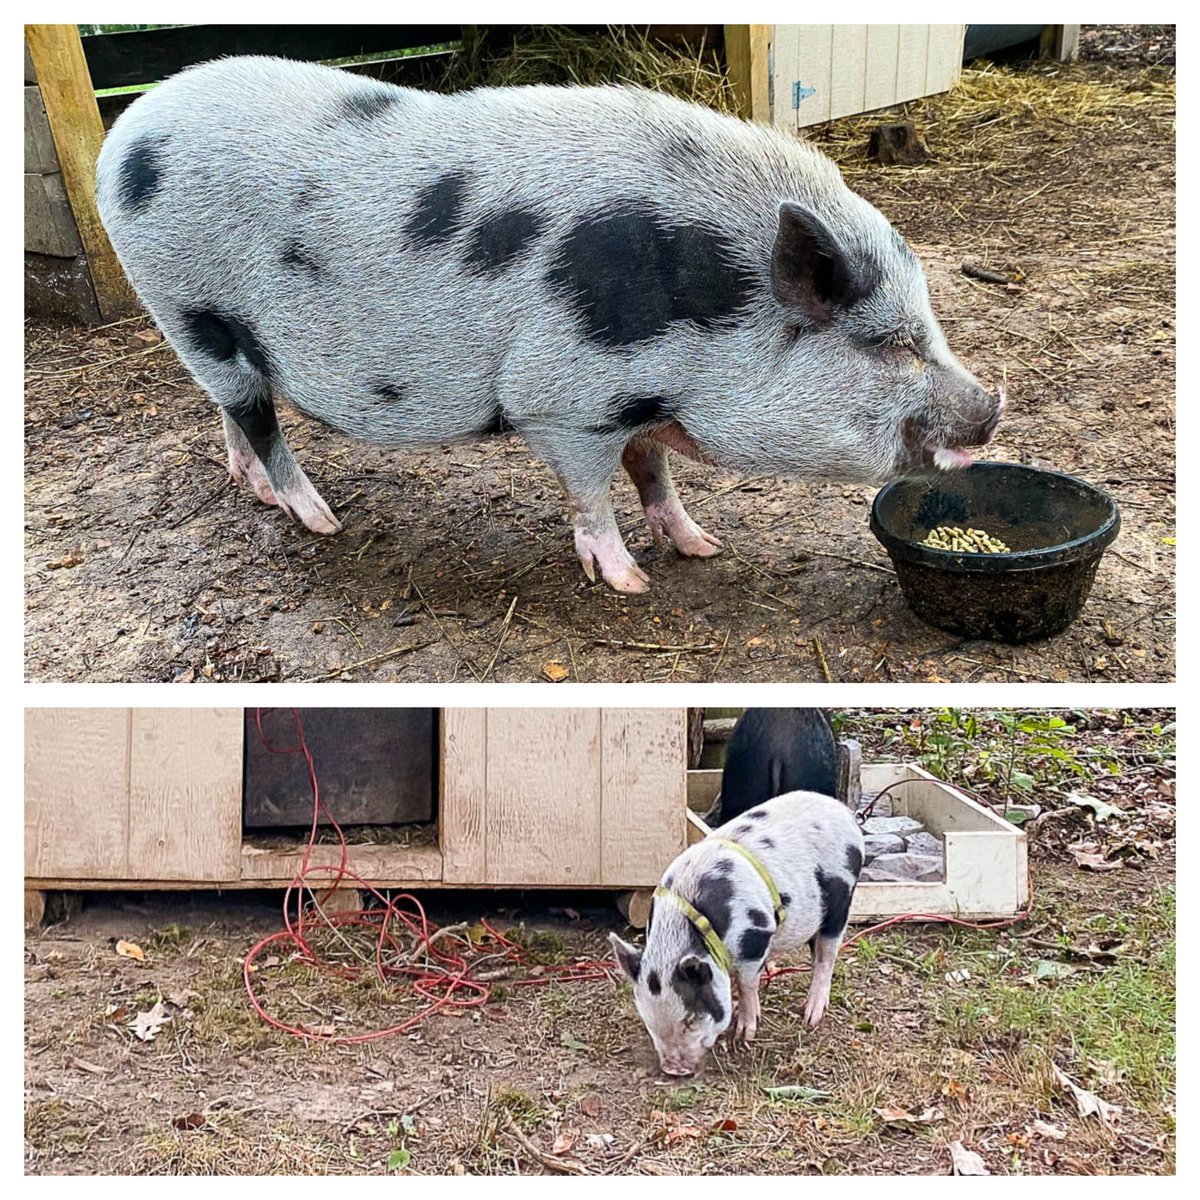 Mr. Banks is getting big (below photo one year ago)! Sadly this is why so many pigs are re-homed. No pig stays small. The term 'mini pig' means any pig that is not a giant farm hog. Mr. Banks will always be a 'mini pig'. ❤️🐷 Visit pigginsandbanks.org/donate/ for many ways to help!